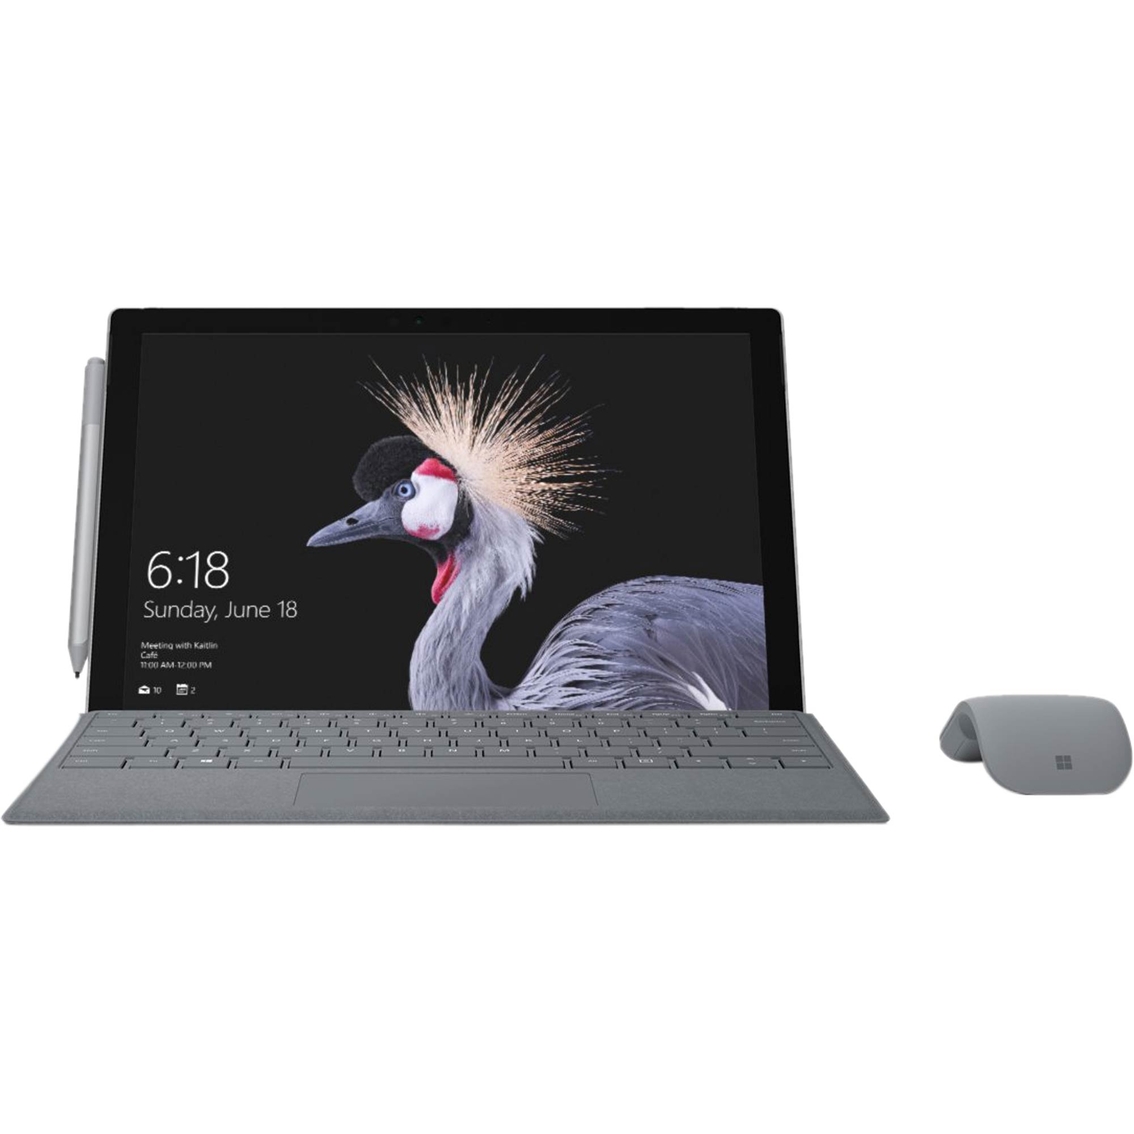 Microsoft Surface Pro 12.3 in. Intel Core M3 2.6GHz 4GB RAM 128GB - Image 4 of 4